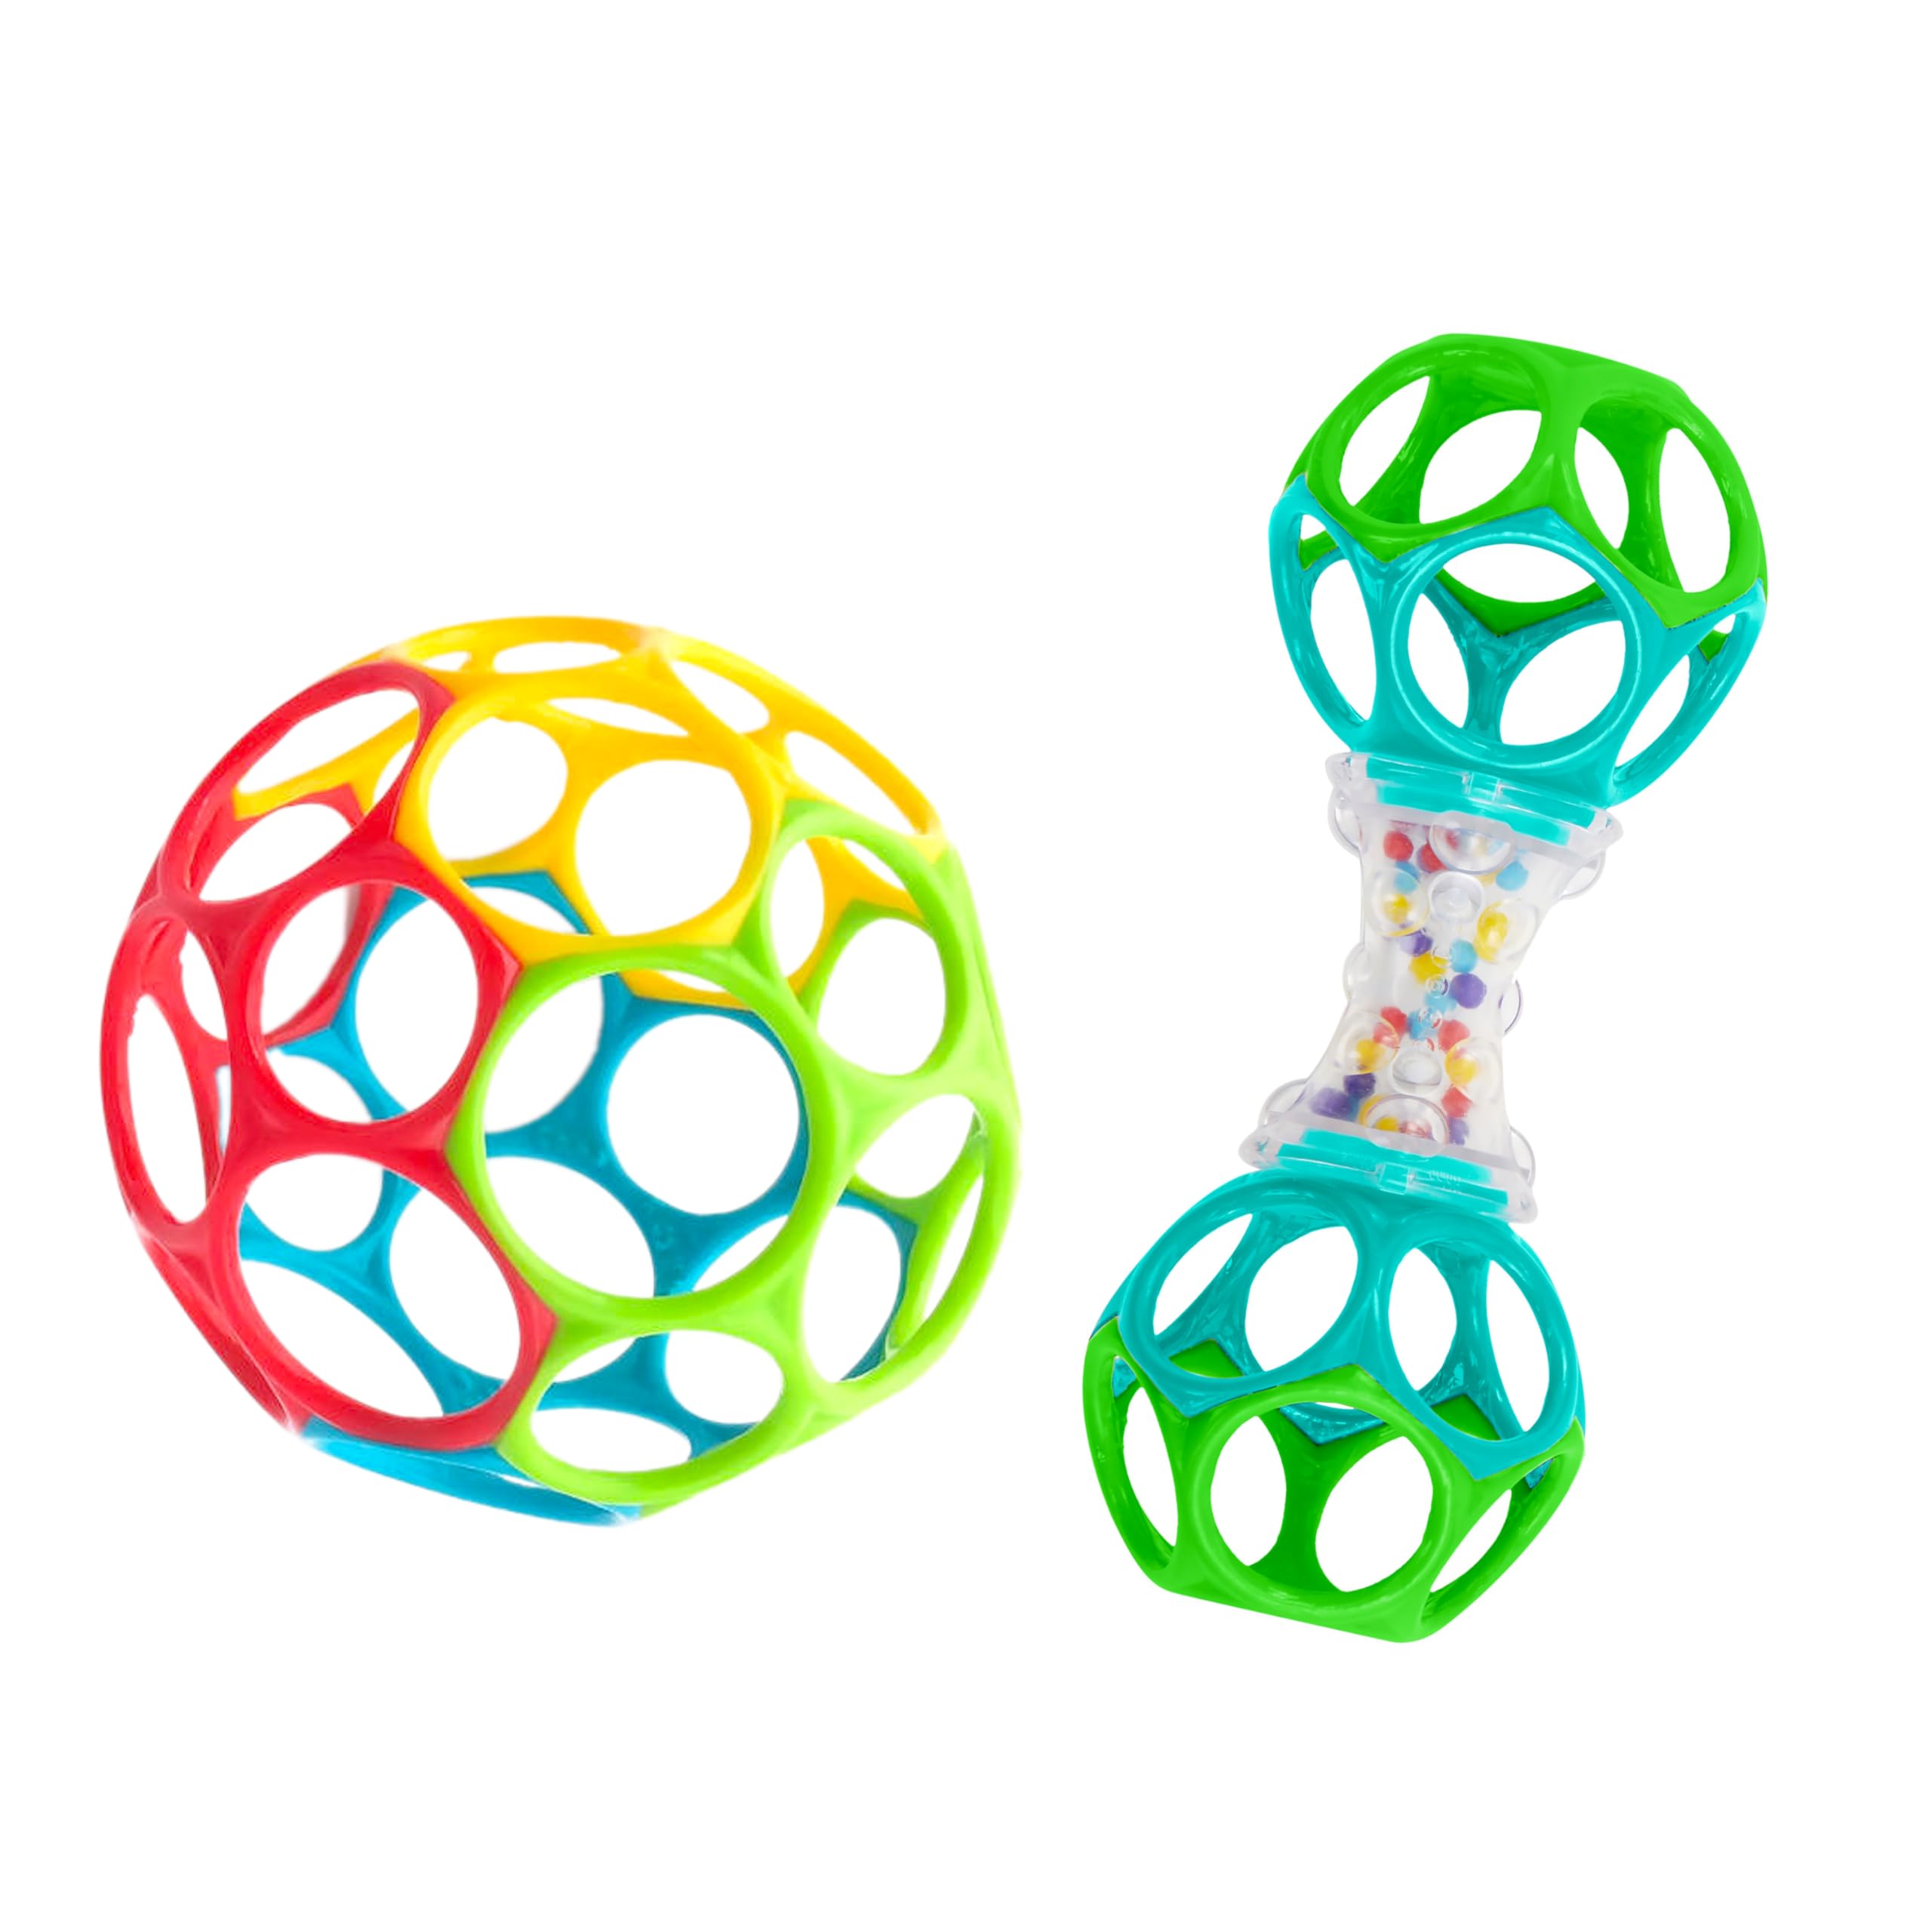 Bright Starts Easy-Grasp Oball Bundle Gift Set - Grasp The Day, Ball and Rattle Toys 2-Pack, BPA Free, Unisex, Newborn+